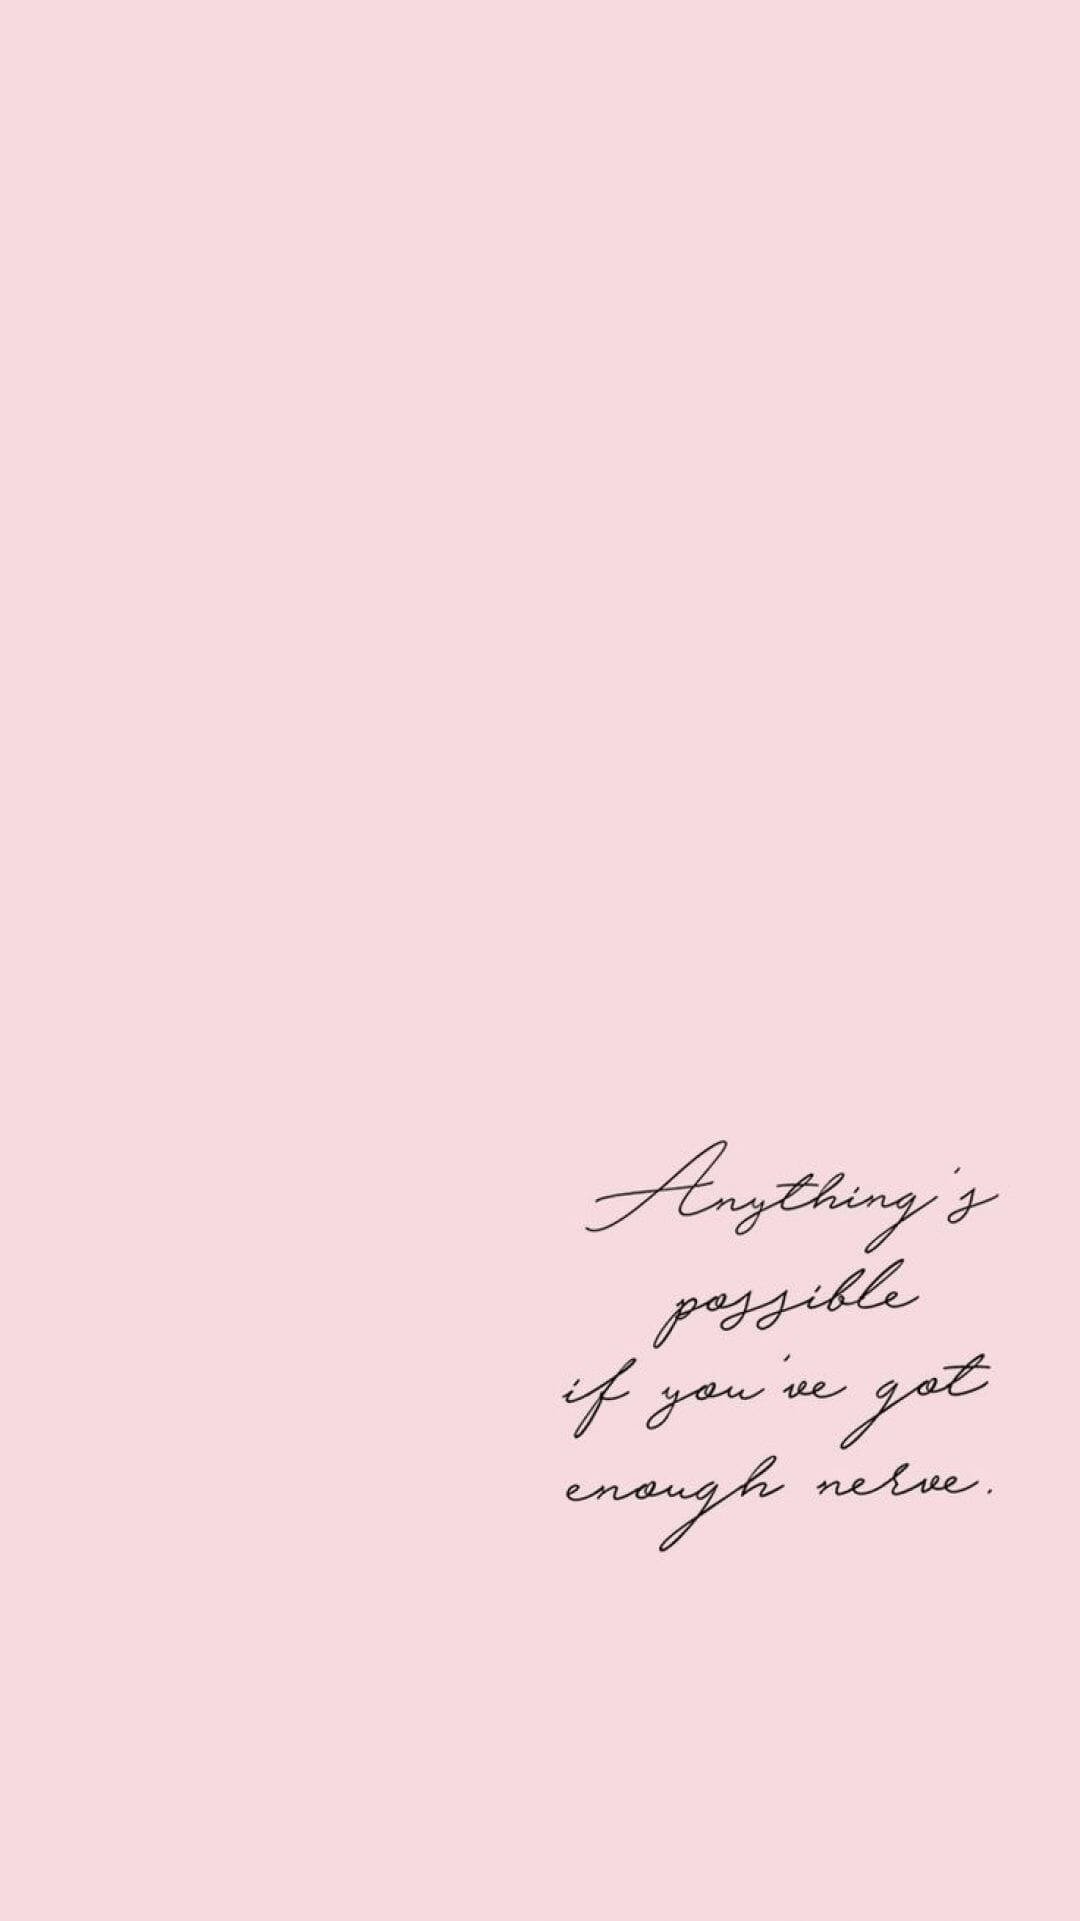 Download Aesthetic Quotes Cursive Style Writing Wallpaper